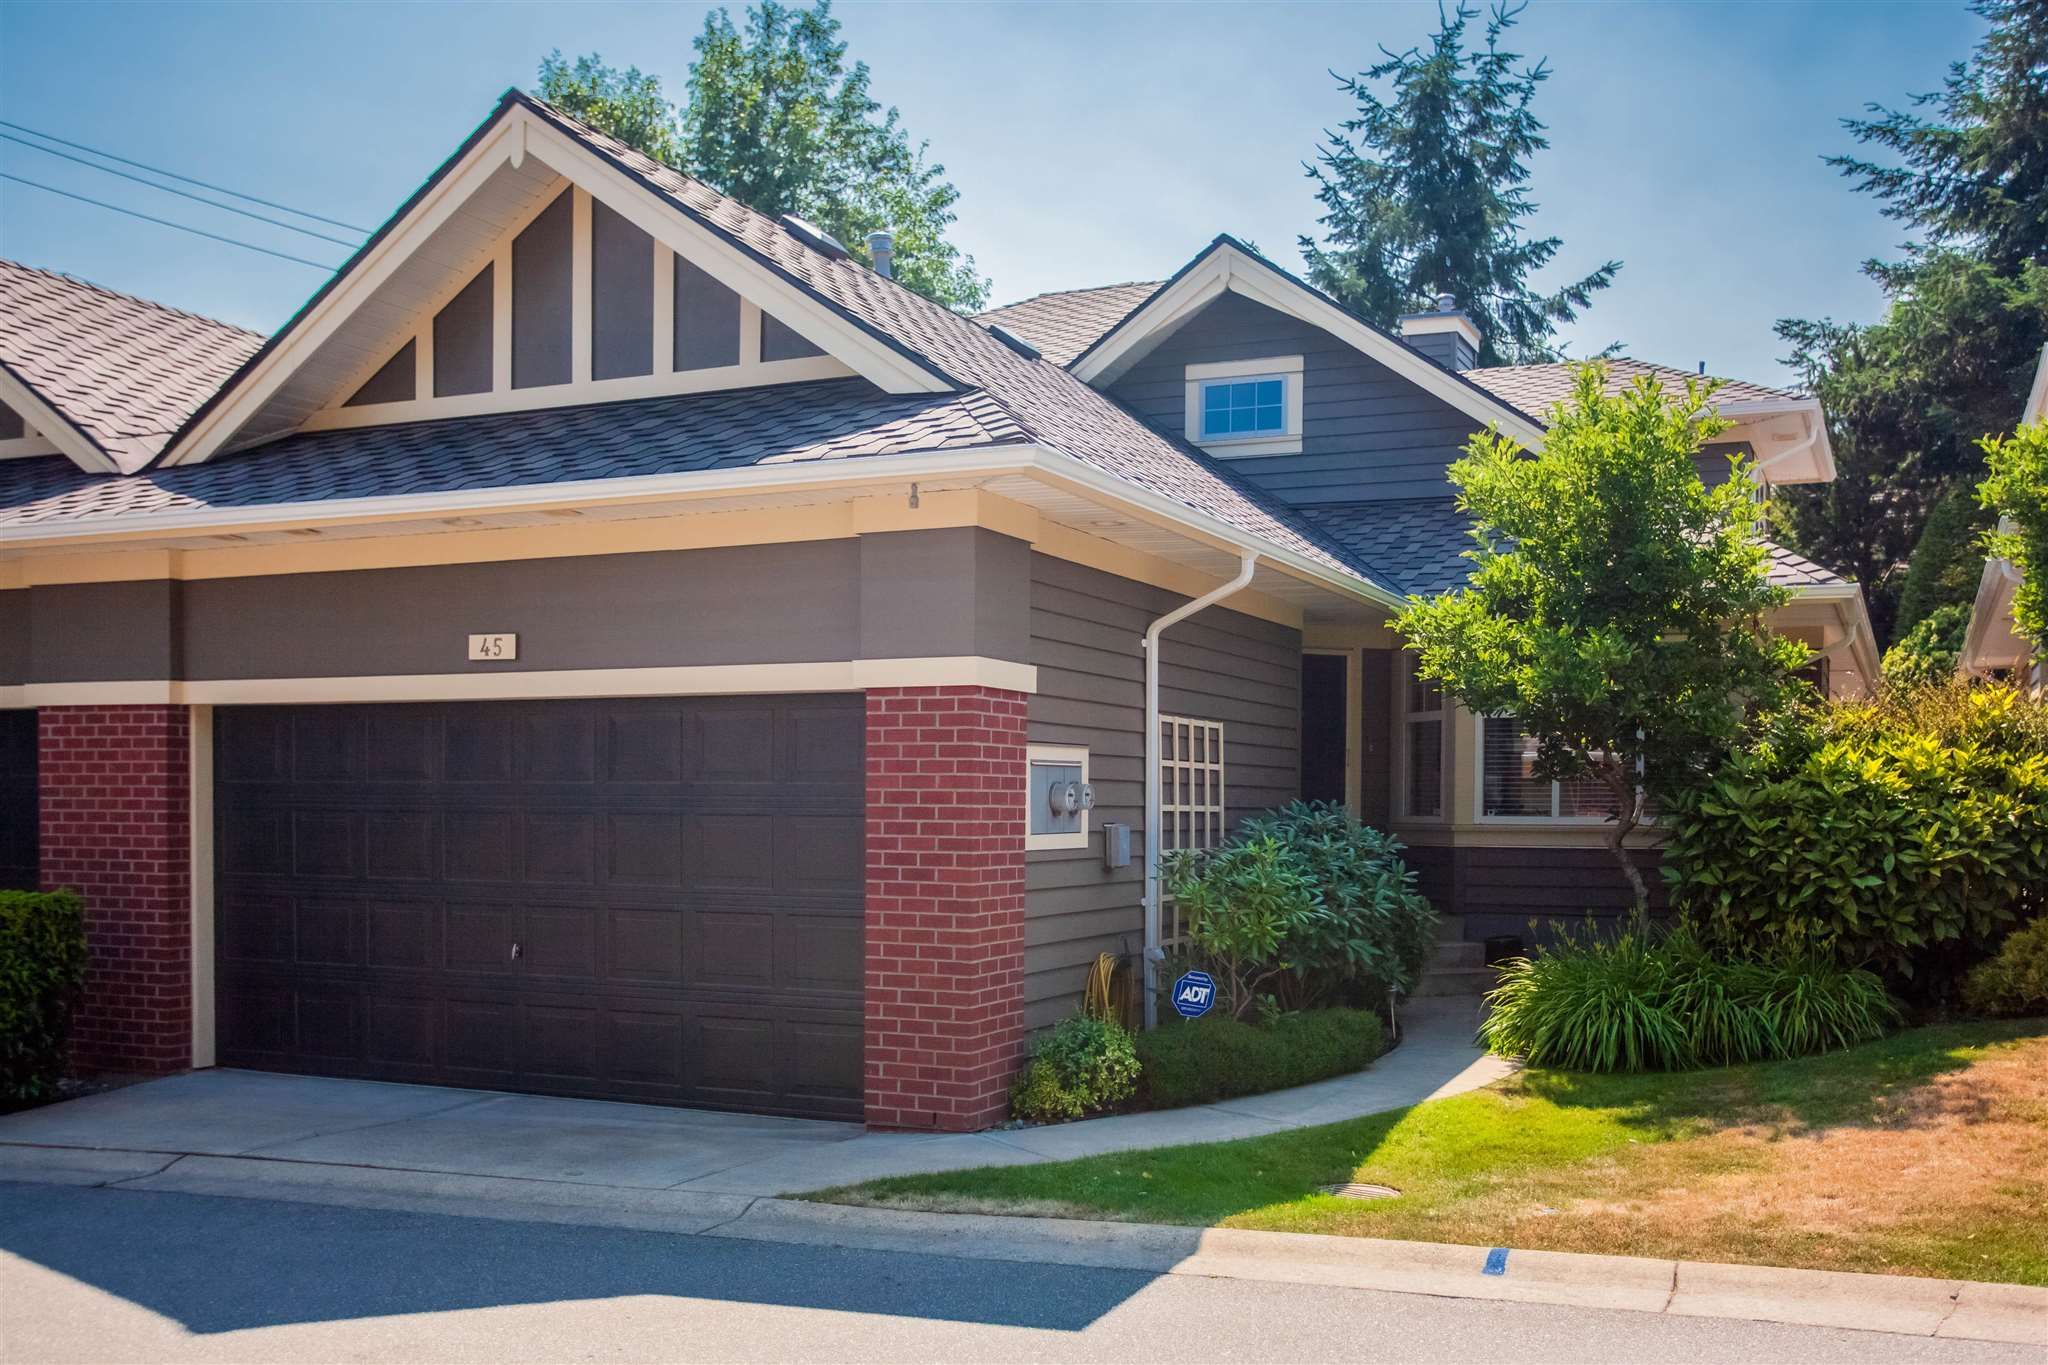 I have sold a property at 45 15450 ROSEMARY HEIGHTS CRES in Surrey
